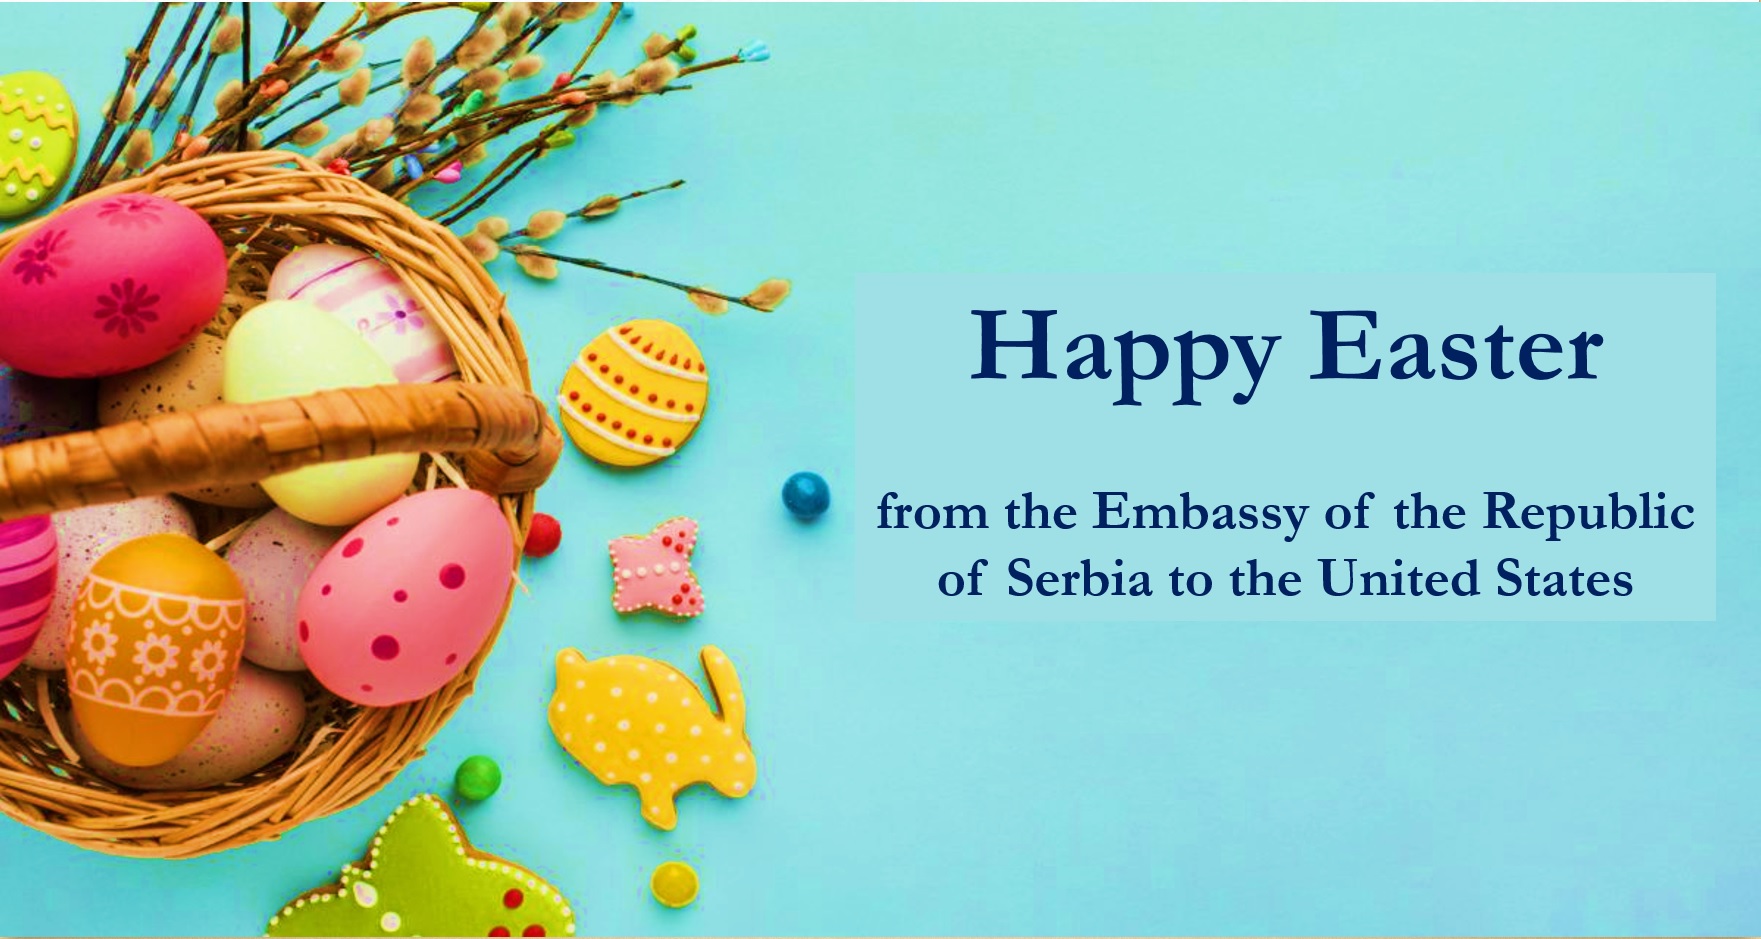 Марко Ђурић on X: To everyone celebrating, I wish you a happy #Easter ,  filled with love, happiness, and peace. May this holy day bring joy, hope,  and blessings to you and